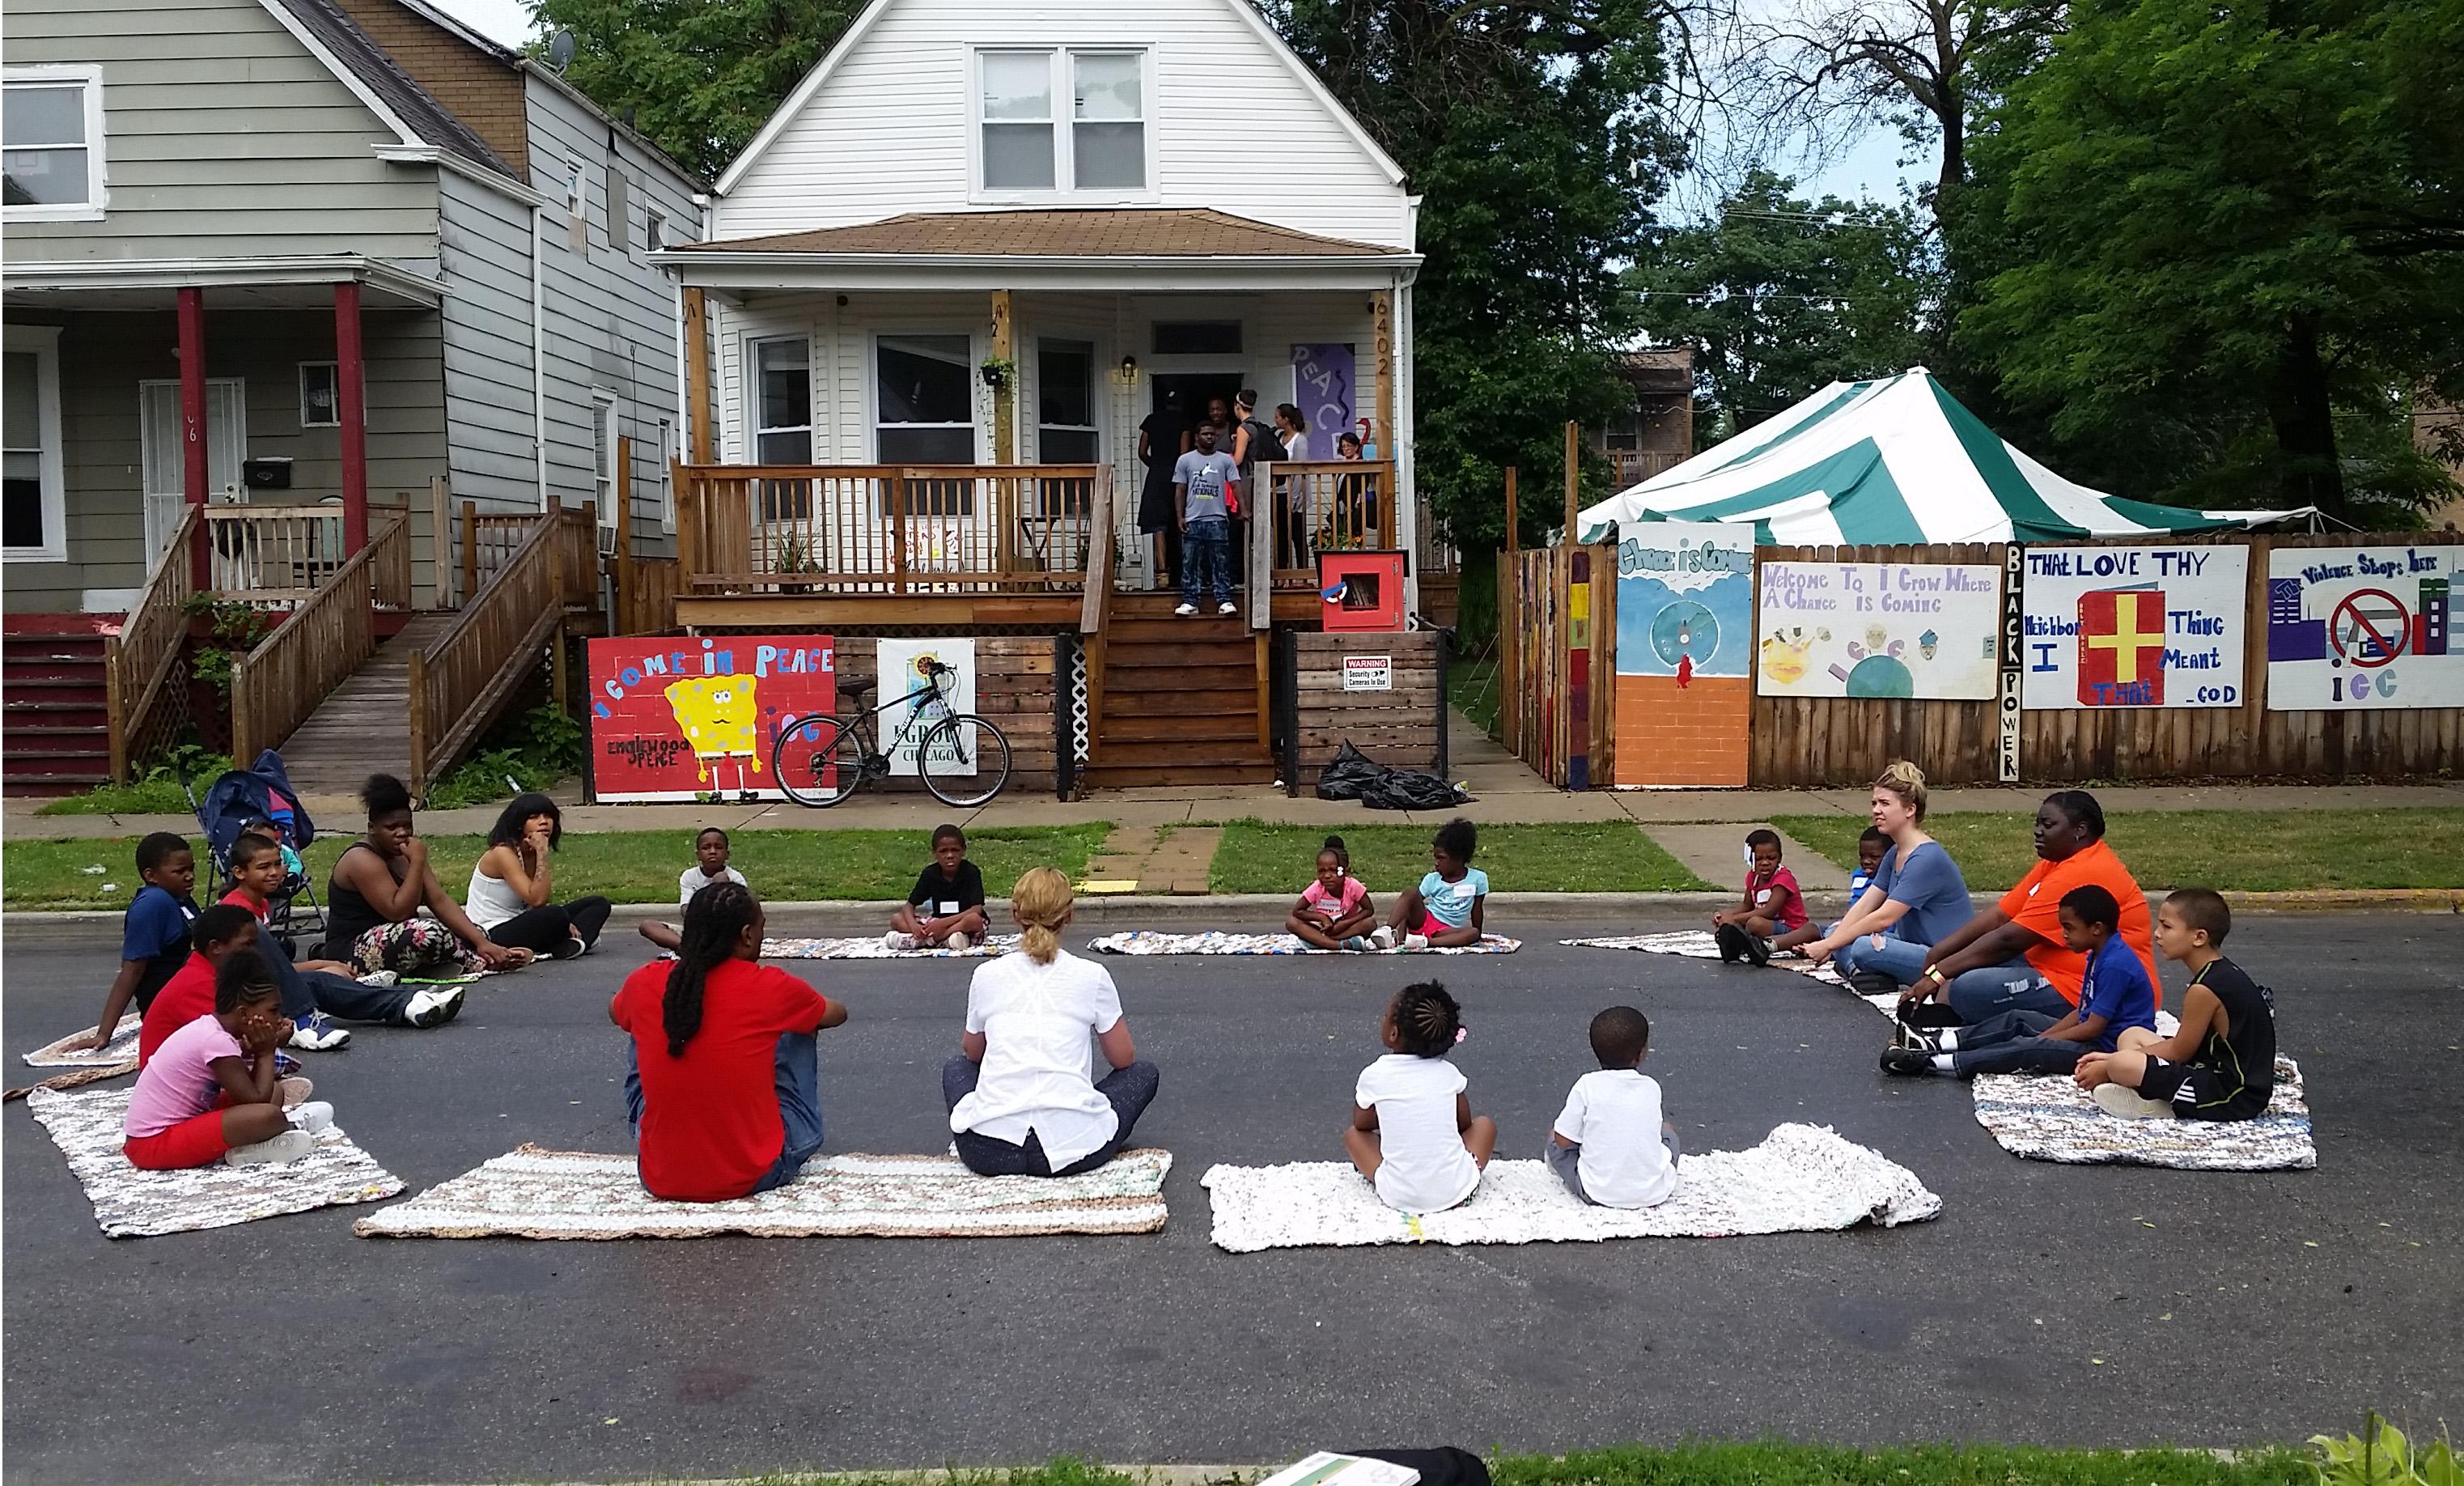 Participants take part in street yoga outside the Peace House, a community center in Englewood built by the nonprofit group I Grow Chicago. (Courtesy of Erin Vogel)